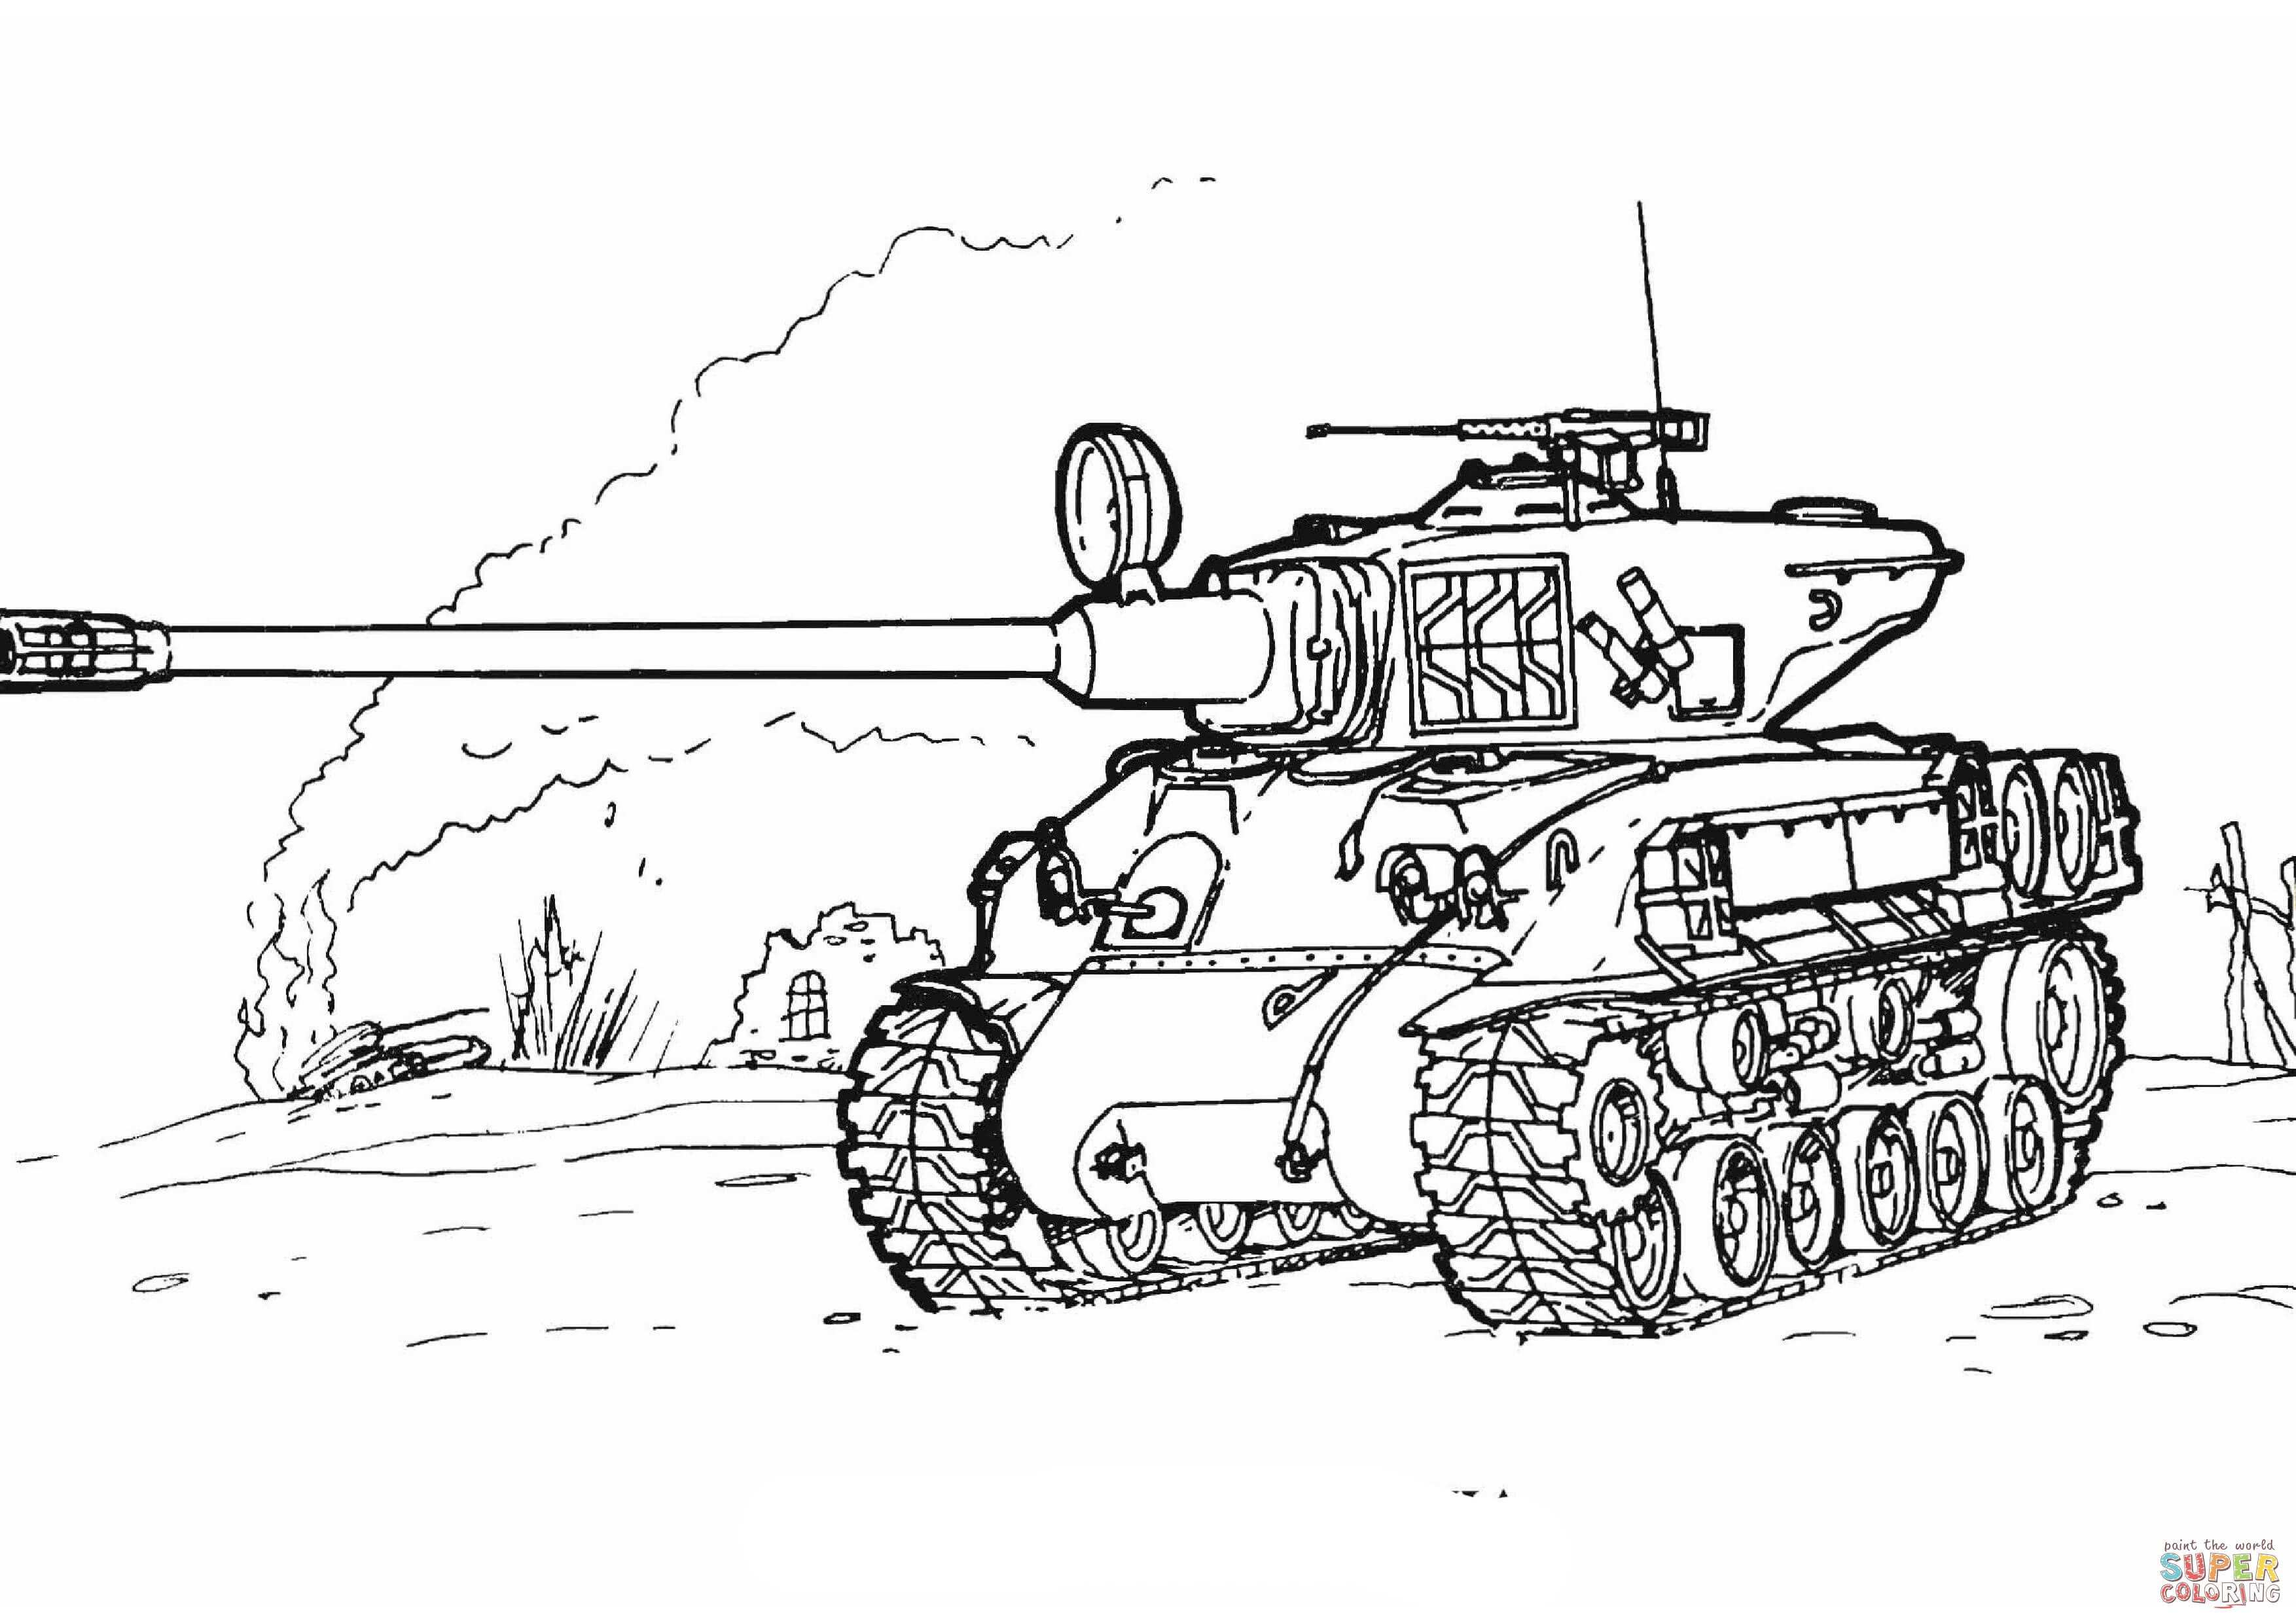 Sherman M 51 Tank Coloring Page From Tanks Category Select From